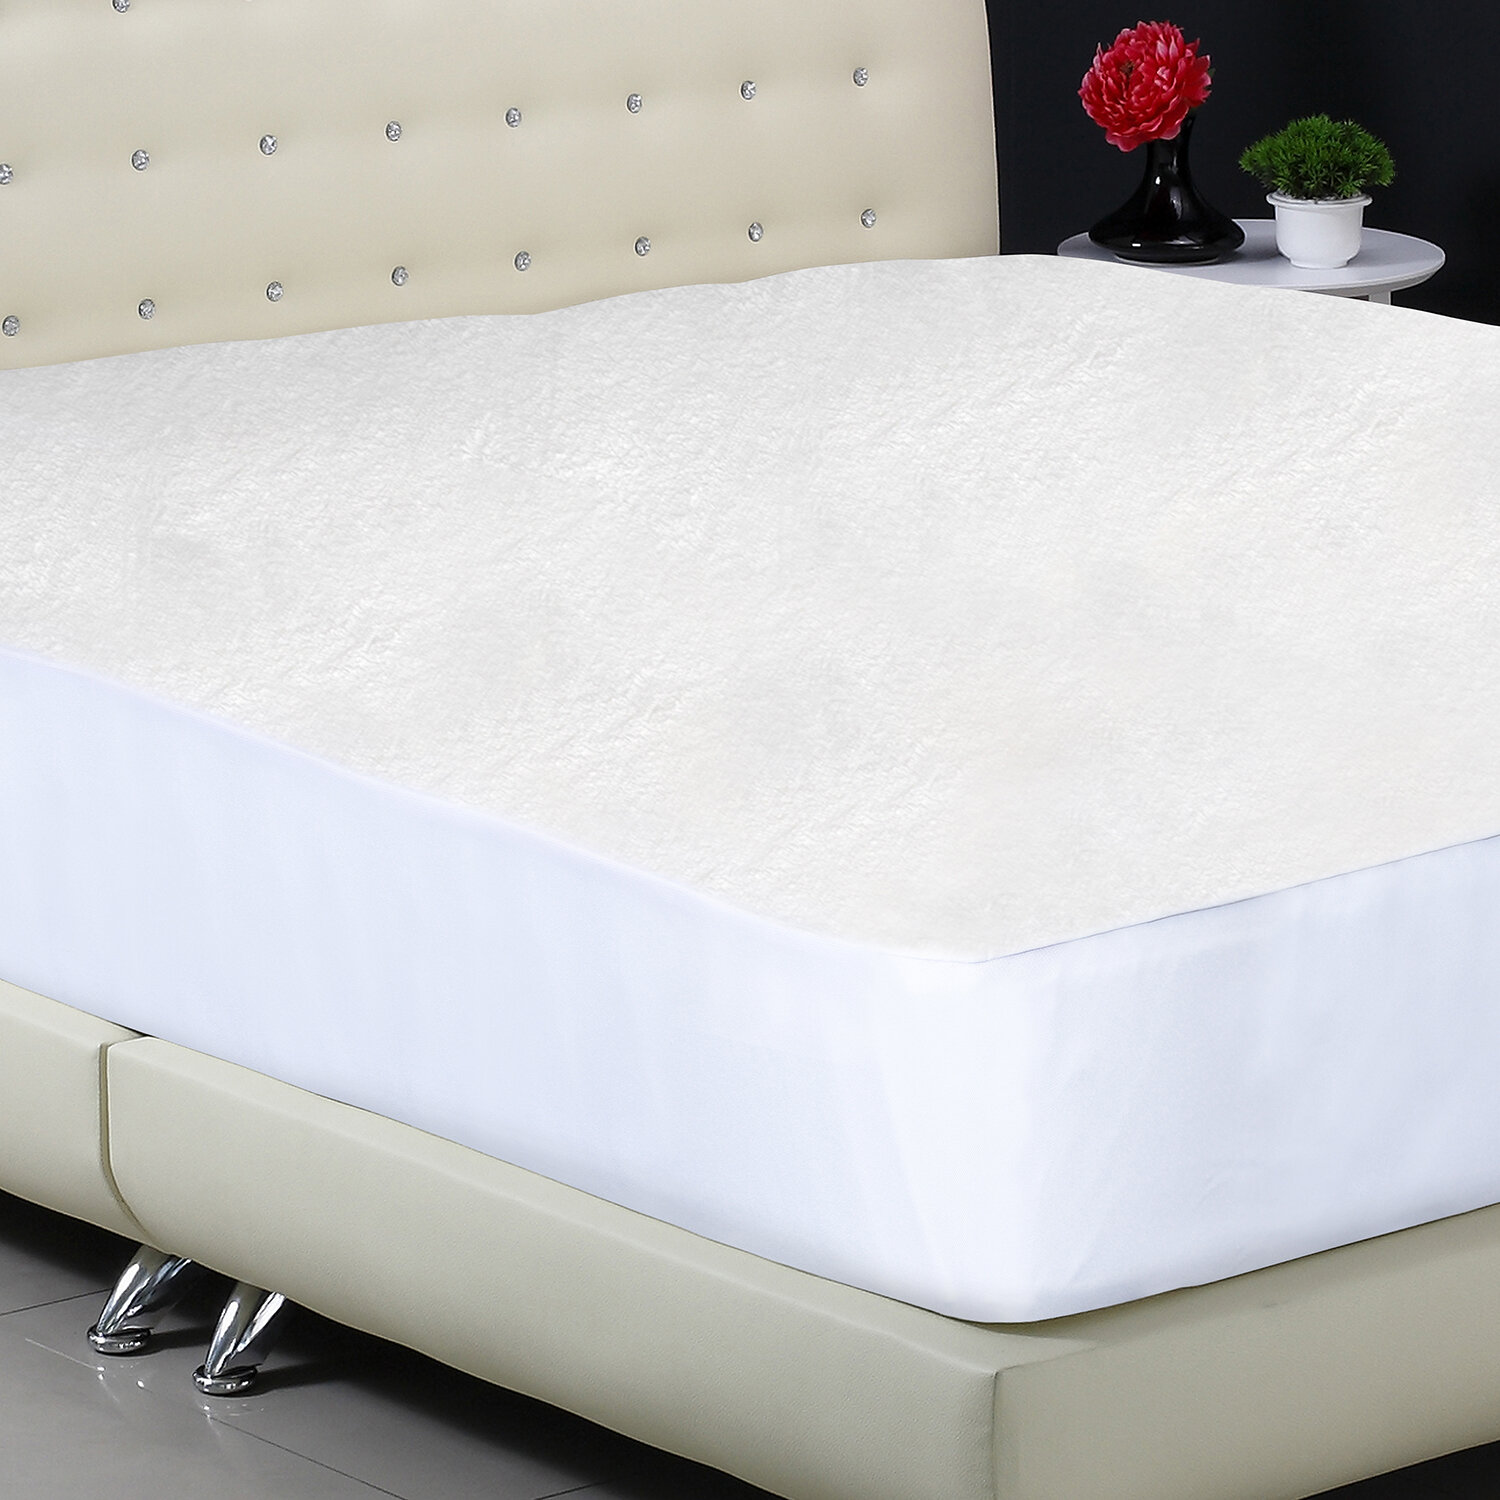 PROTECT A BED  PLUSH SUPER SOFT VELOUR LUXURY 100/% WATERPROOF MATTRESS PROTECTOR